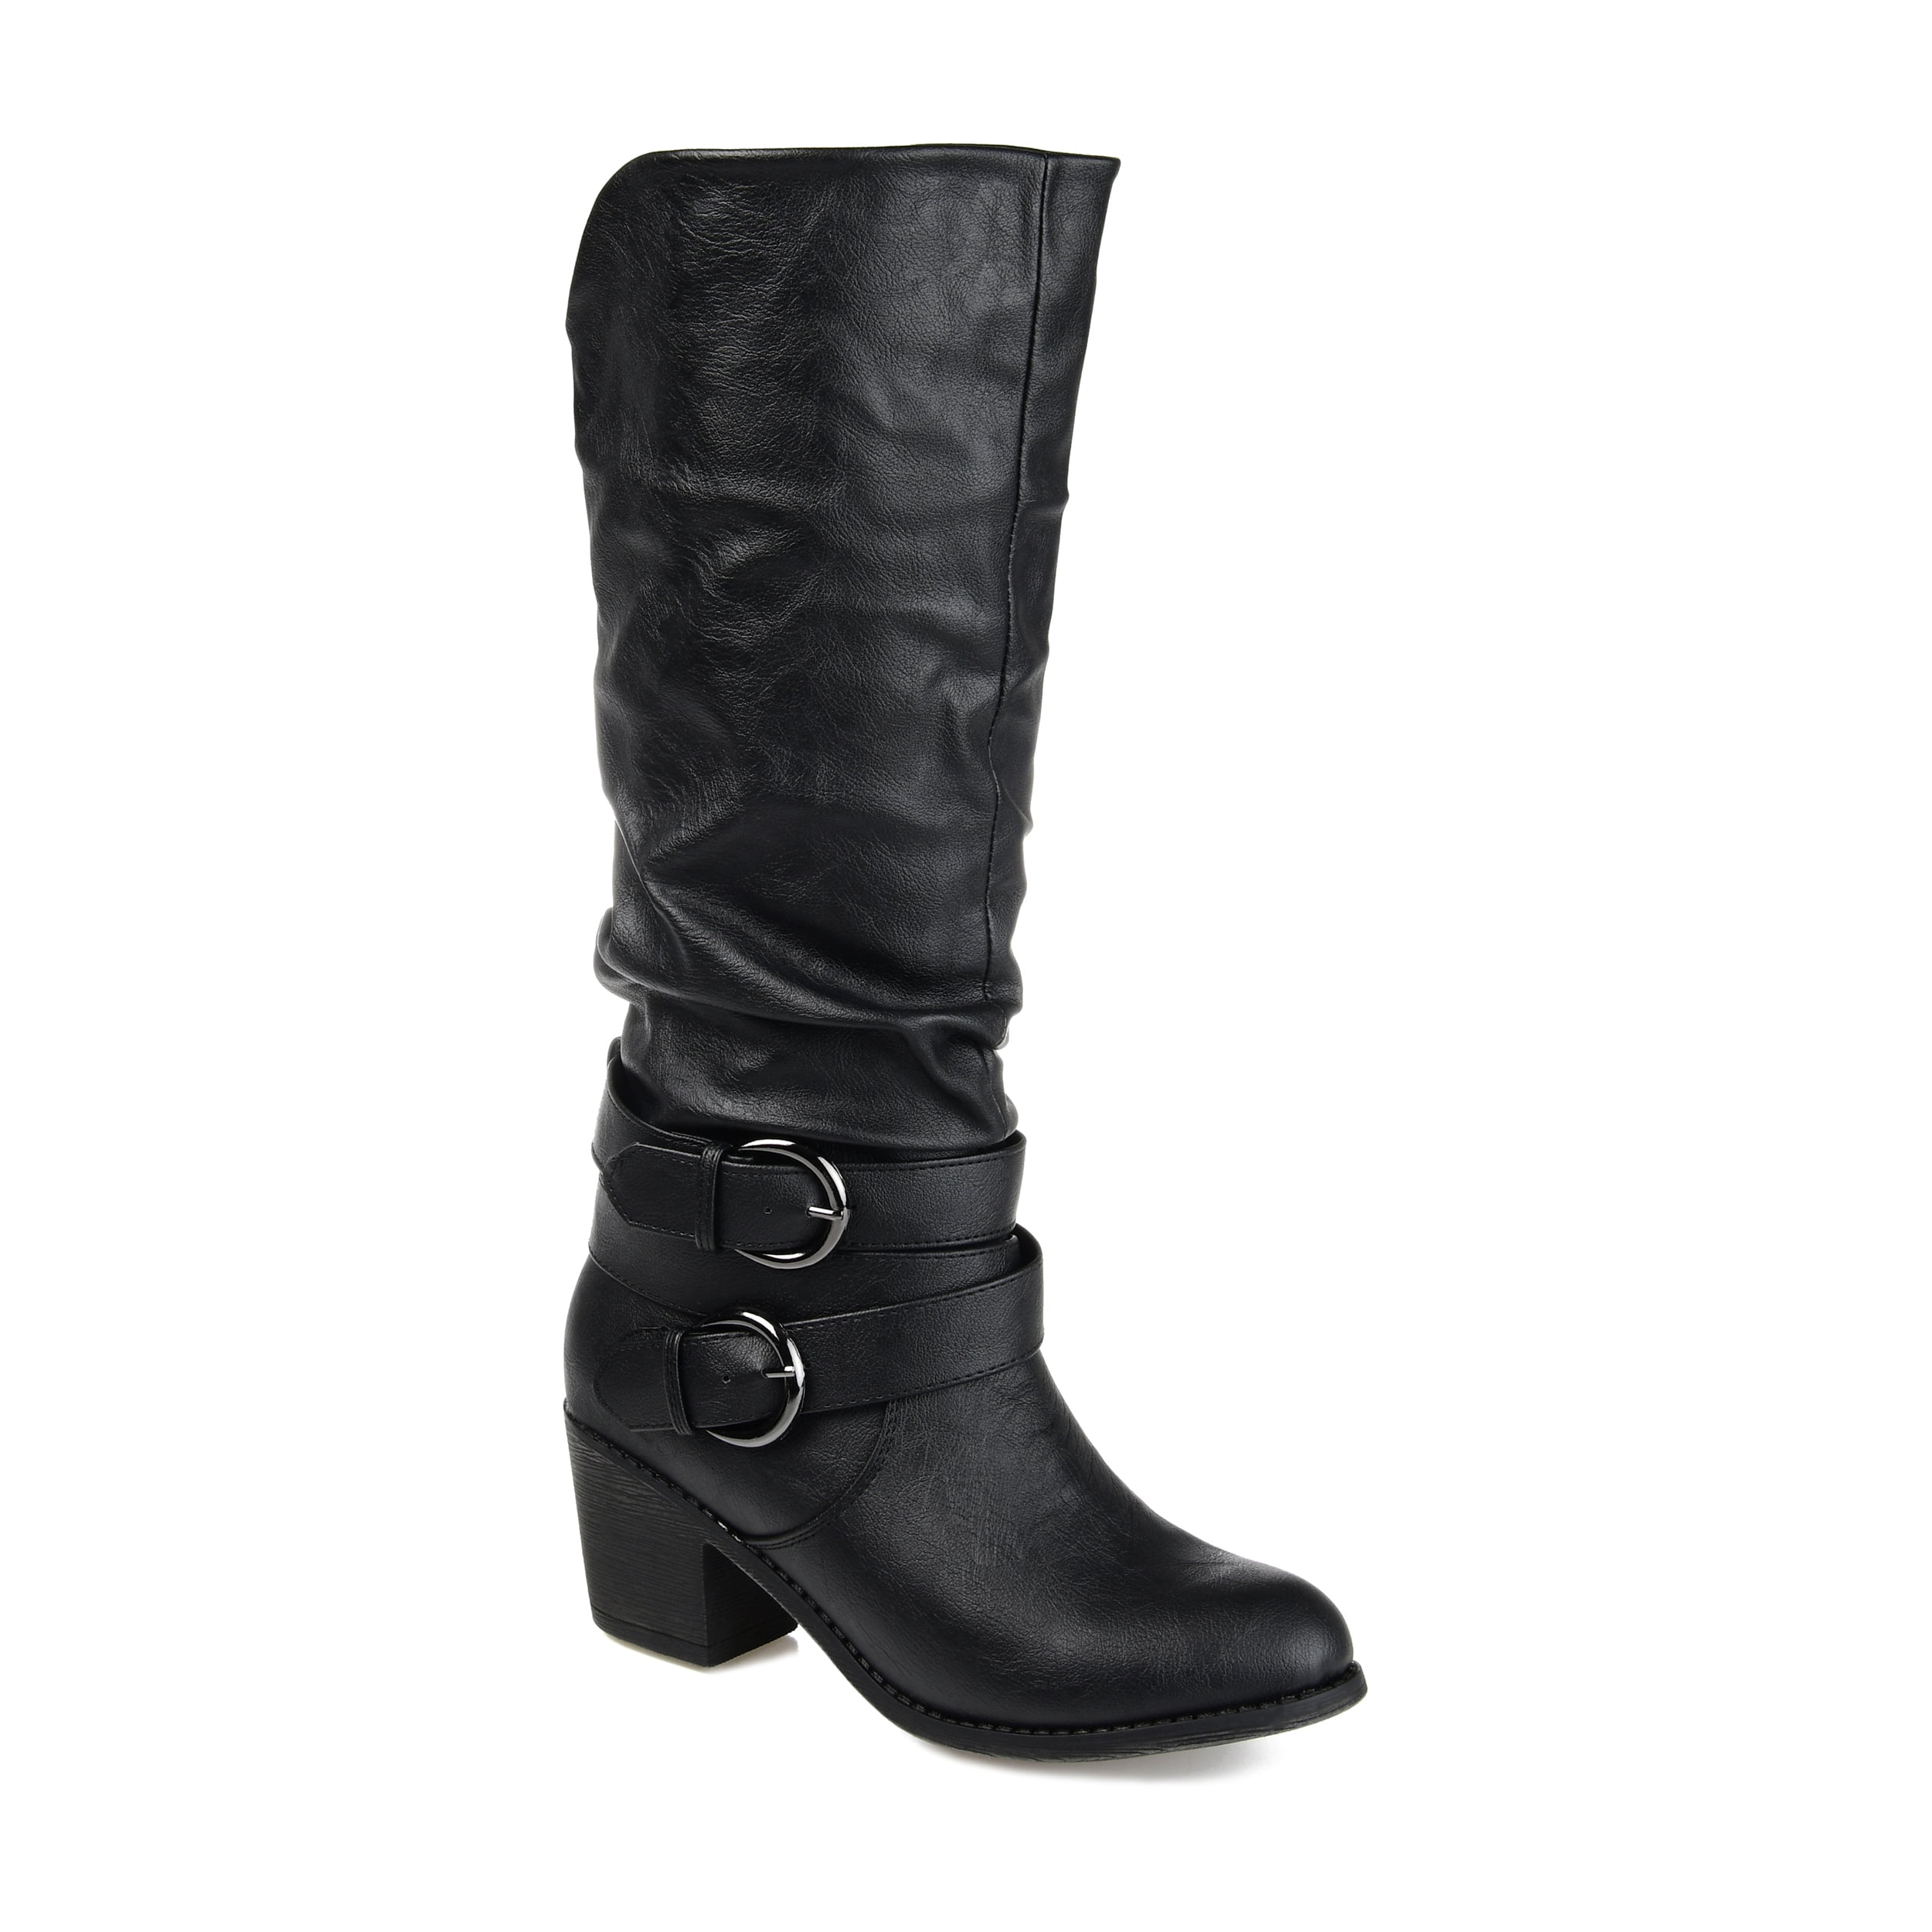 Boohoo Wide Fit Buckled Block Heel Boots in Black Womens Shoes Boots Over-the-knee boots 